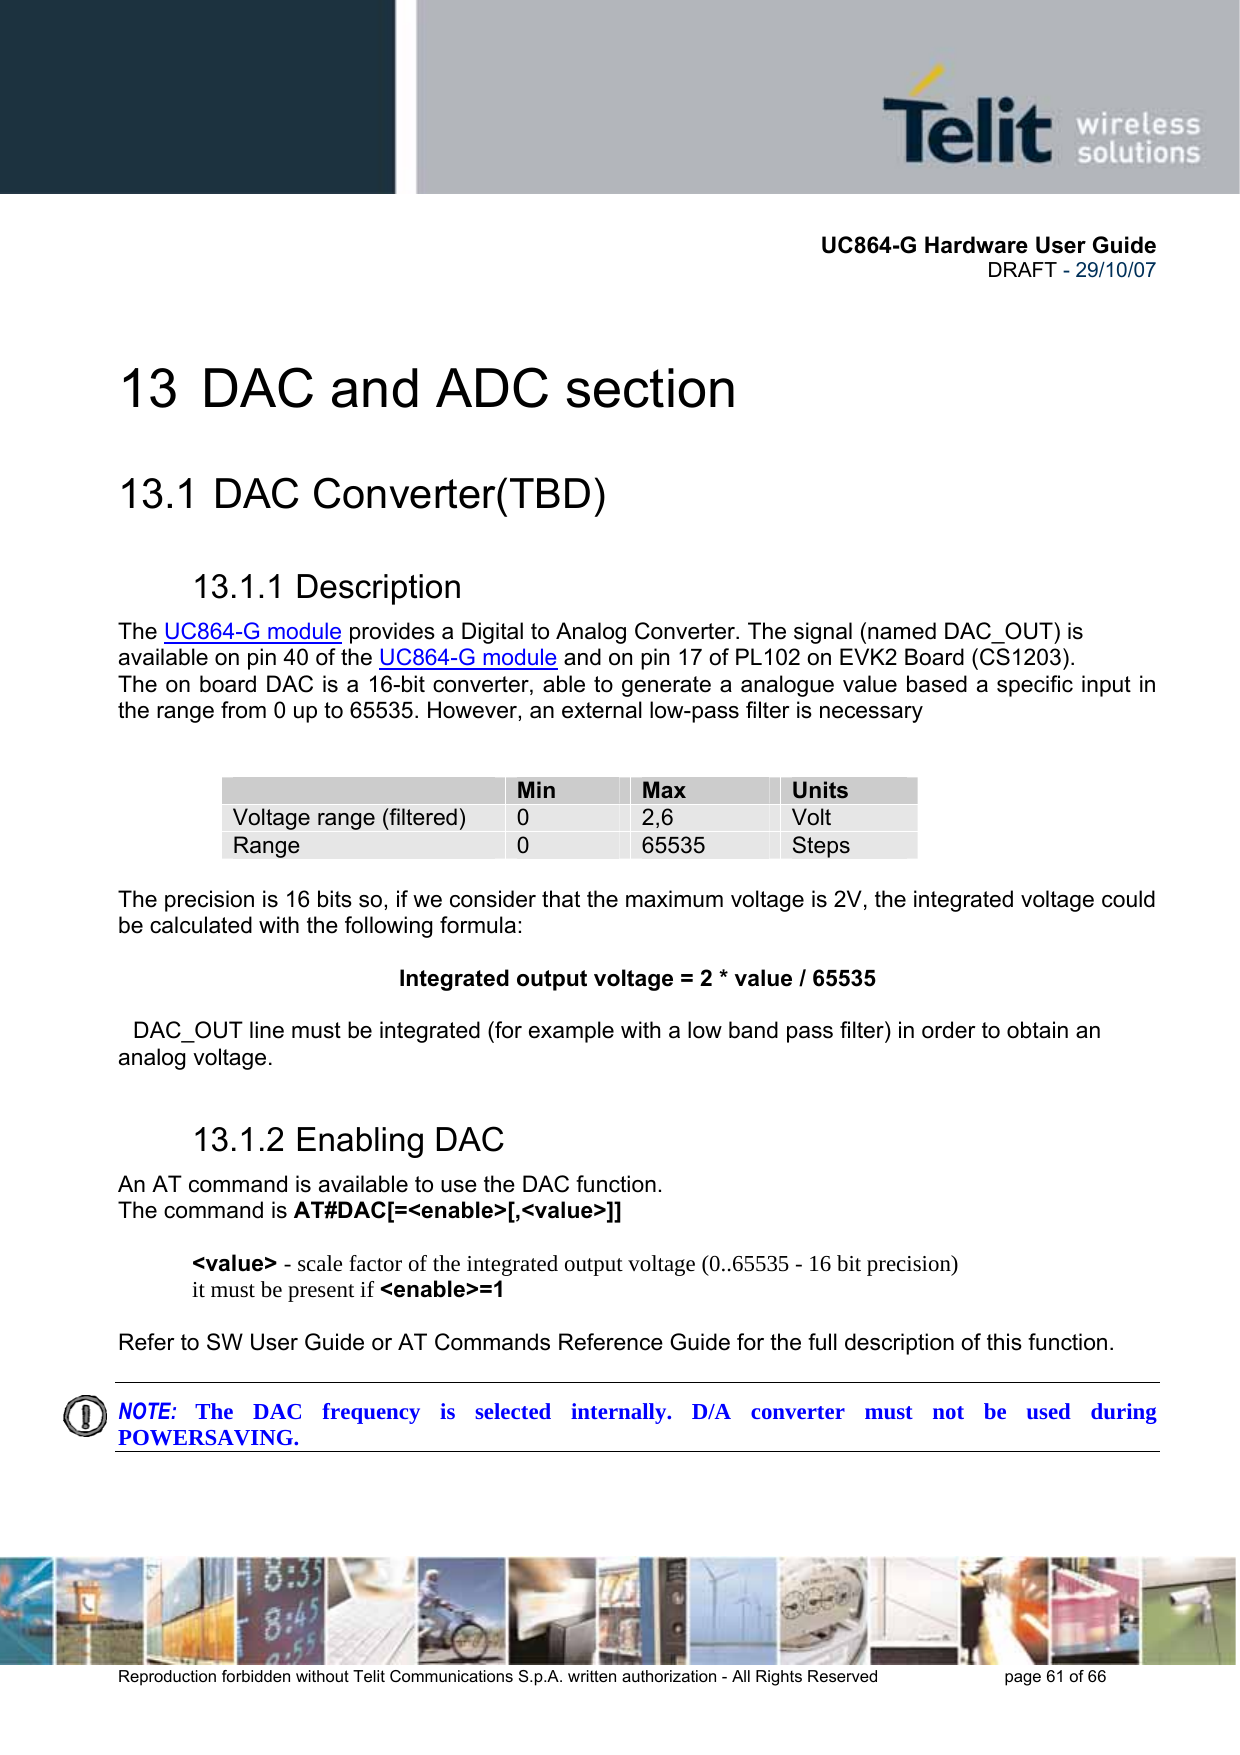       UC864-G Hardware User Guide  DRAFT - 29/10/07      Reproduction forbidden without Telit Communications S.p.A. written authorization - All Rights Reserved    page 61 of 66  13  DAC and ADC section 13.1   DAC  Converter(TBD) 13.1.1 Description The UC864-G module provides a Digital to Analog Converter. The signal (named DAC_OUT) is available on pin 40 of the UC864-G module and on pin 17 of PL102 on EVK2 Board (CS1203). The on board DAC is a 16-bit converter, able to generate a analogue value based a specific input in the range from 0 up to 65535. However, an external low-pass filter is necessary    Min  Max  Units Voltage range (filtered)  0  2,6  Volt Range  0  65535  Steps  The precision is 16 bits so, if we consider that the maximum voltage is 2V, the integrated voltage could be calculated with the following formula:  Integrated output voltage = 2 * value / 65535  DAC_OUT line must be integrated (for example with a low band pass filter) in order to obtain an analog voltage. 13.1.2 Enabling DAC An AT command is available to use the DAC function. The command is AT#DAC[=&lt;enable&gt;[,&lt;value&gt;]]  &lt;value&gt; - scale factor of the integrated output voltage (0..65535 - 16 bit precision) it must be present if &lt;enable&gt;=1  Refer to SW User Guide or AT Commands Reference Guide for the full description of this function.  NOTE:  The DAC frequency is selected internally. D/A converter must not be used during POWERSAVING.   